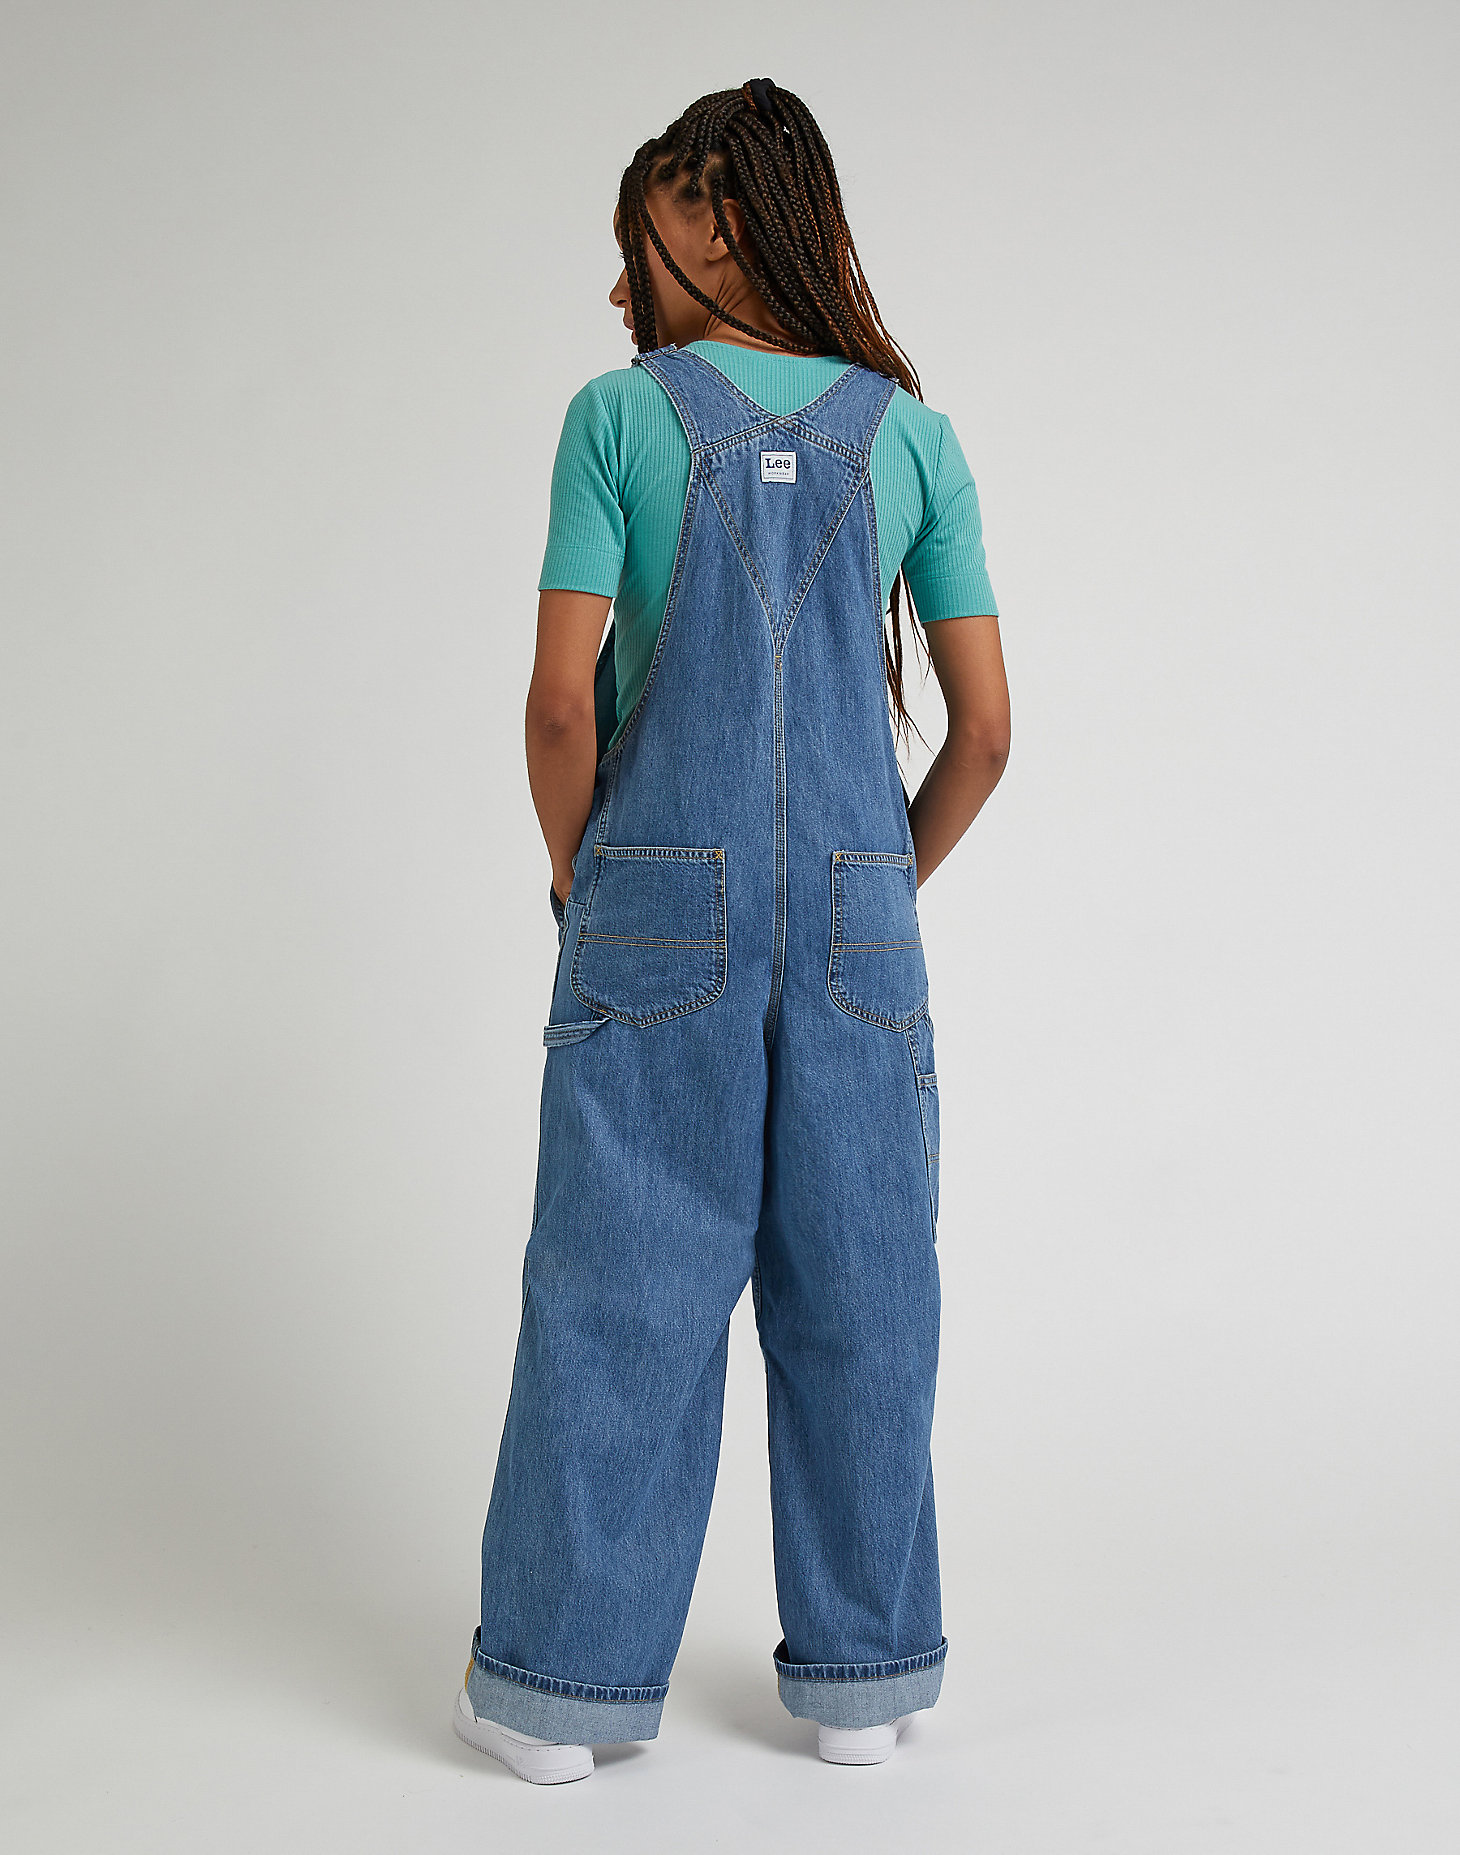 Loose Bib Overall in One Mid alternative view 1